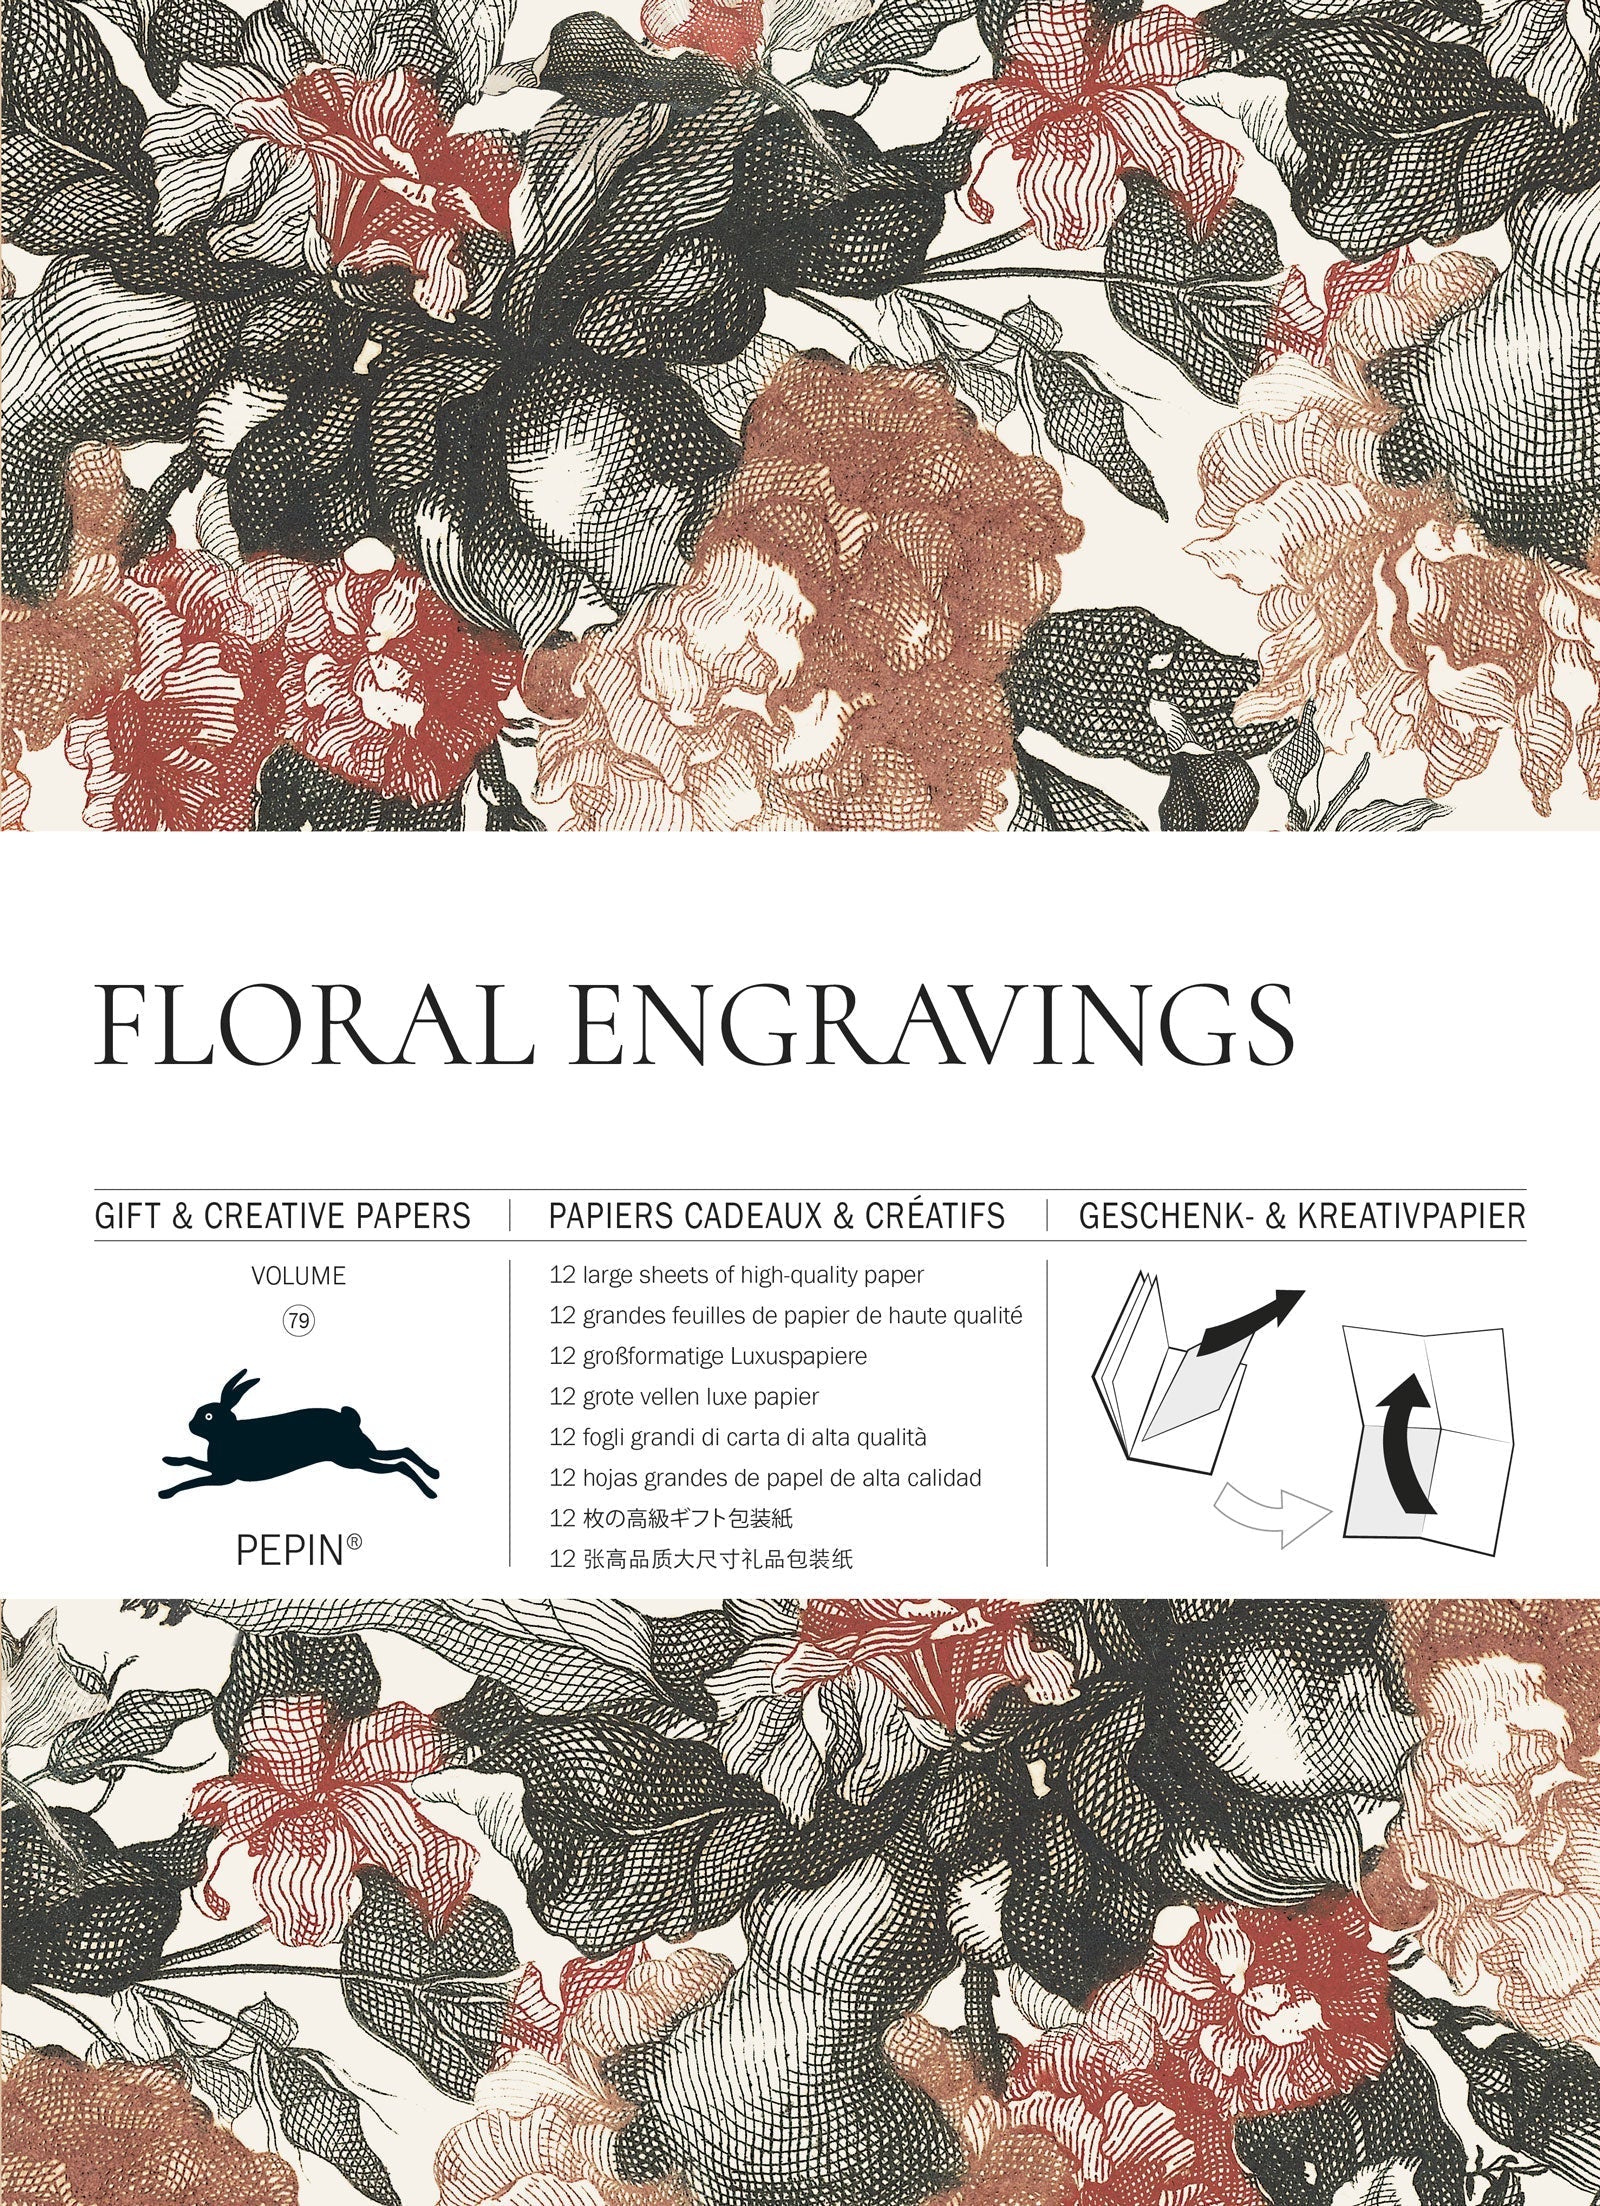 Gift & creative papers - Floral